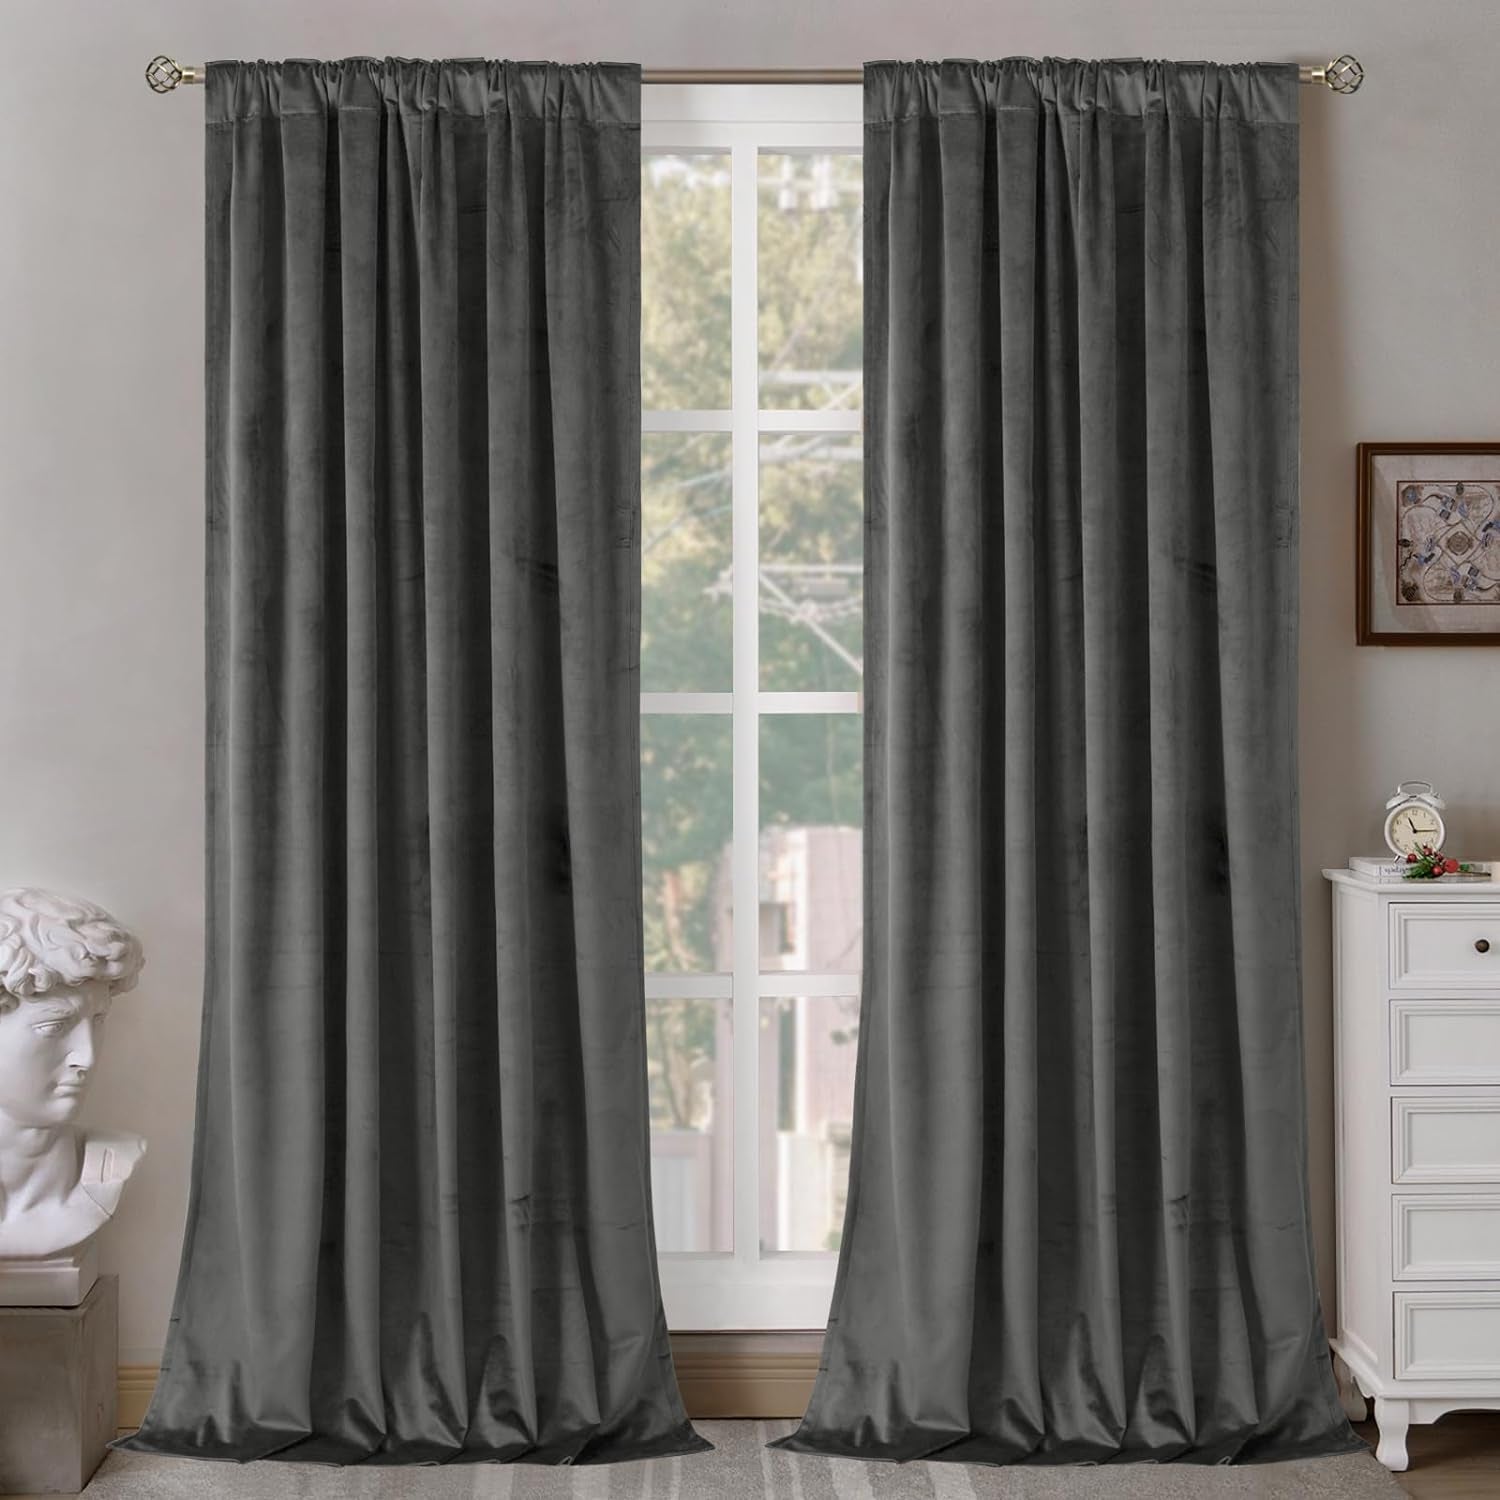 Bgment Grey Velvet Curtains 108 Inches Long for Living Room, Thermal Insulated Room Darkening Curtains Drapes Window Treatment with Back Tab and Rod Pocket, Set of 2 Panels, 52 X 108 Inch  BGment   